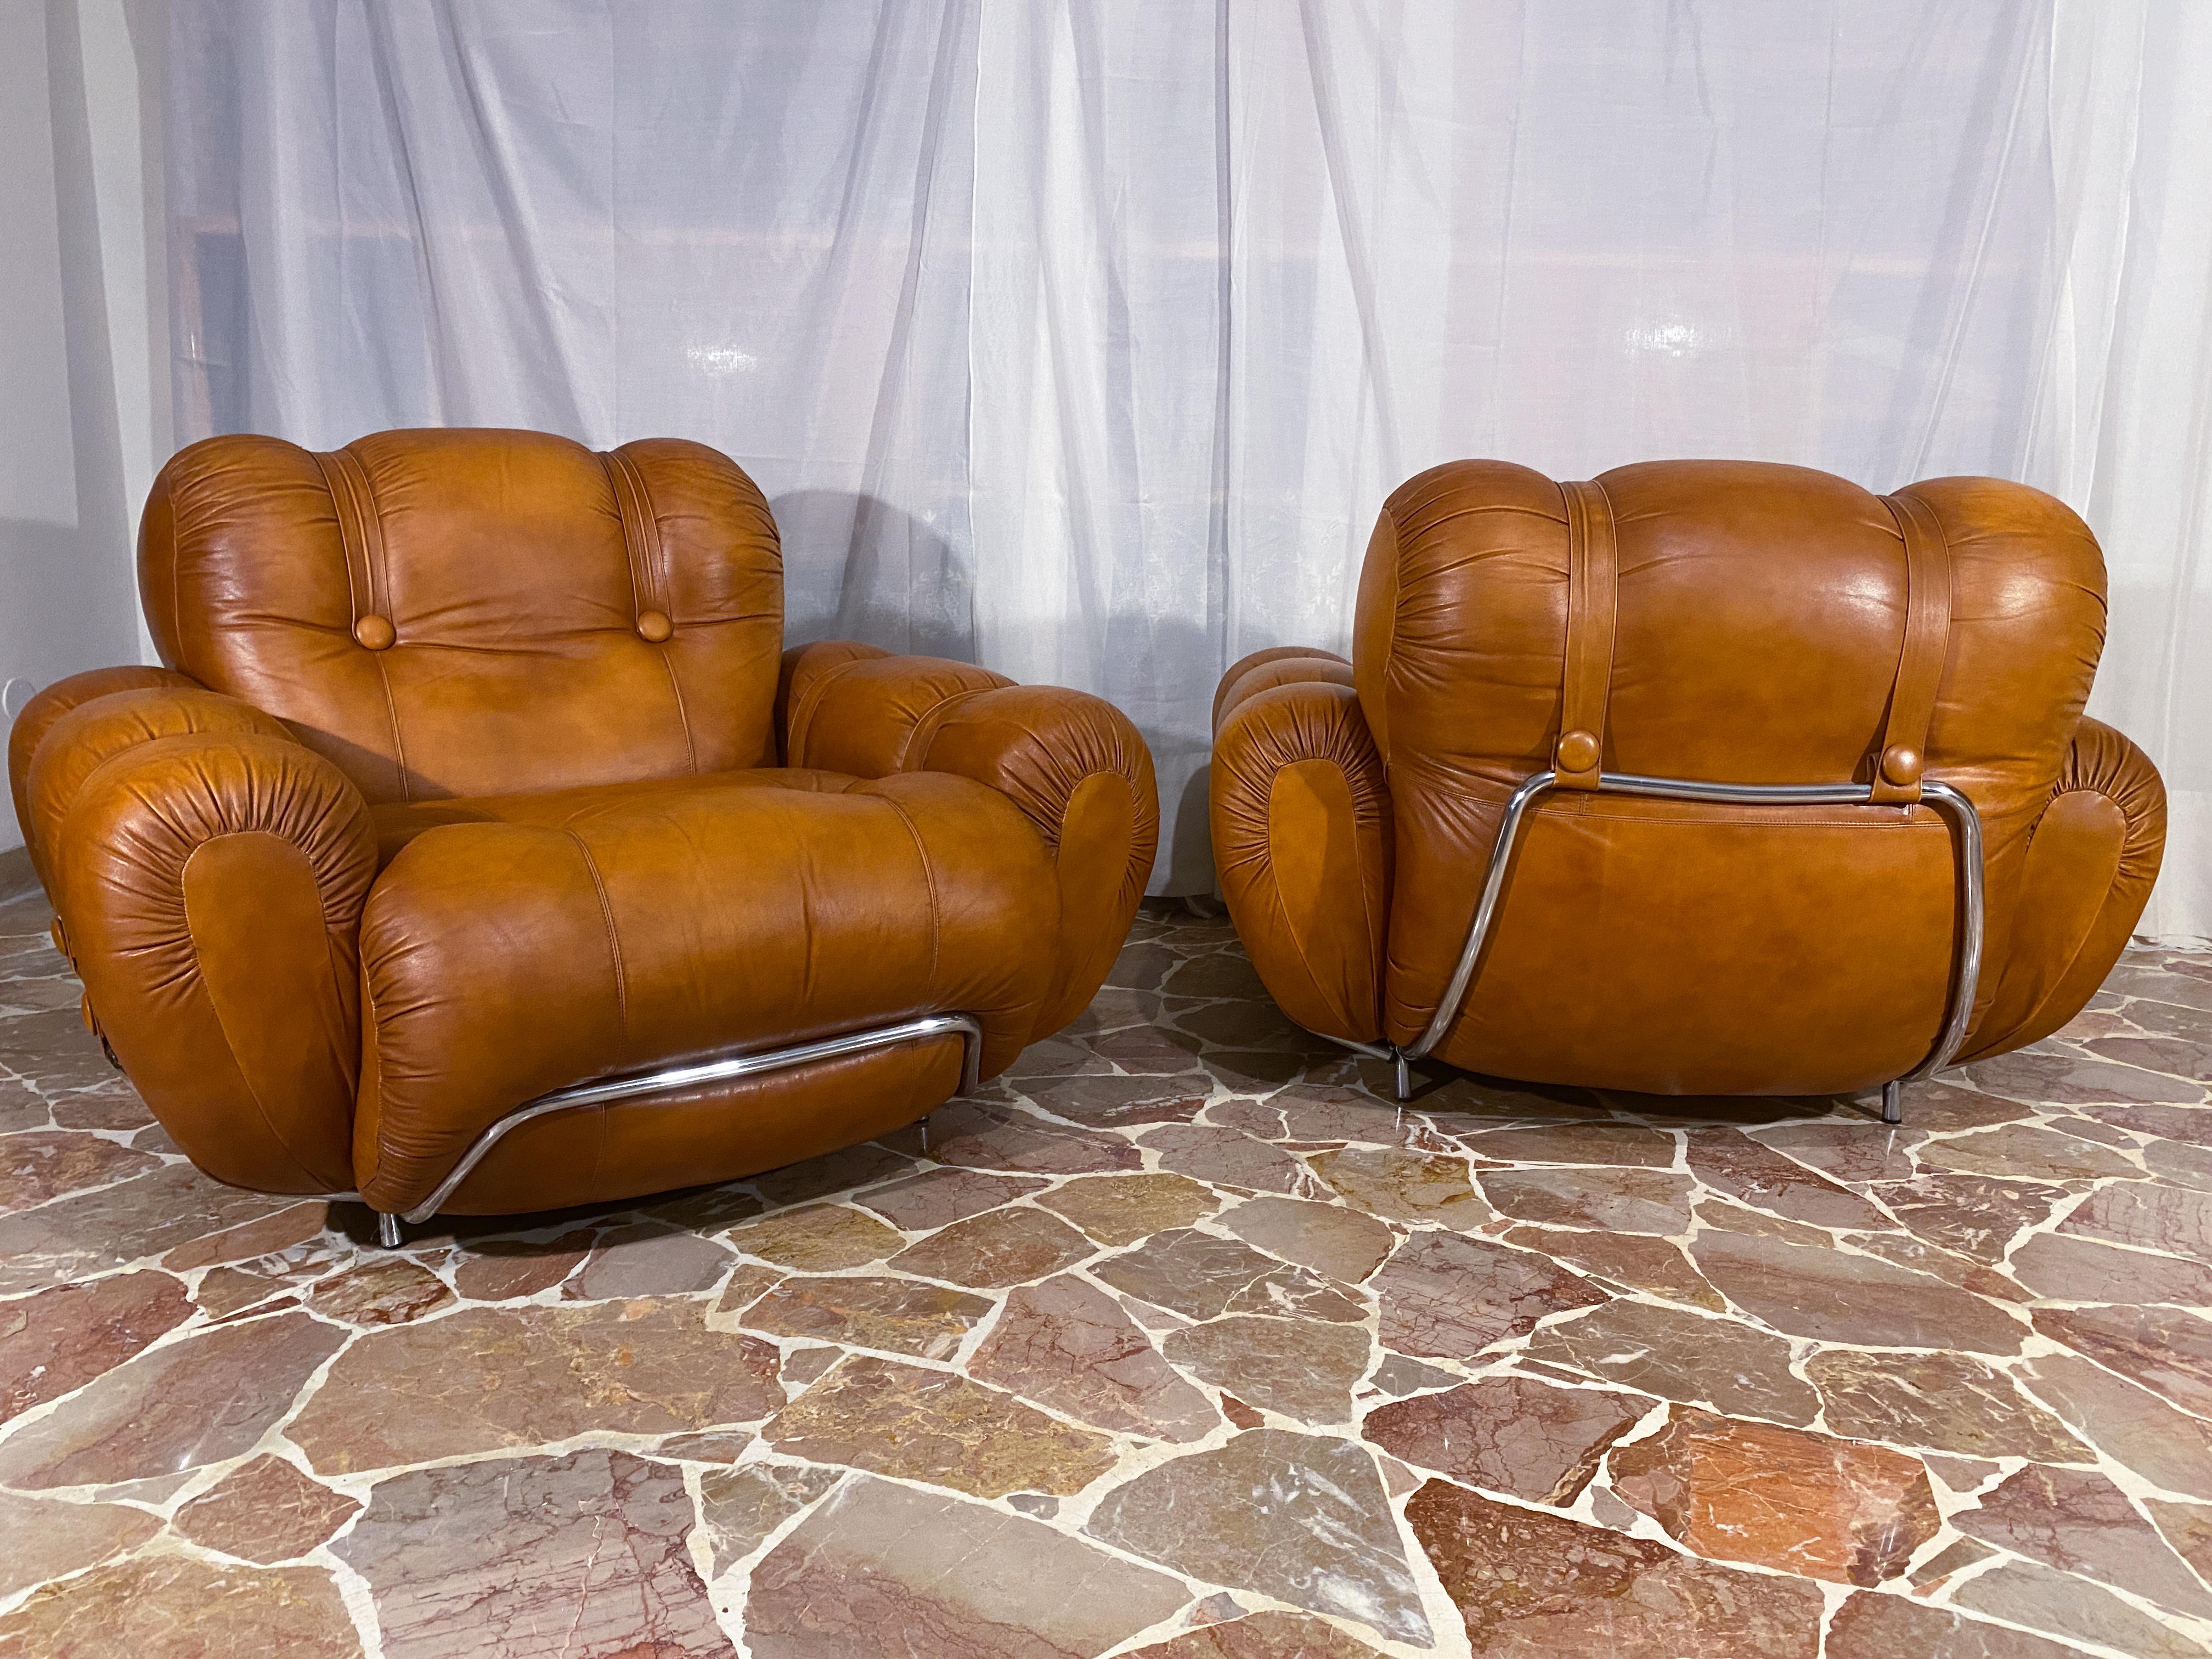 Italian Mid-Century Space Age Living Room Set in Natural Leather, 1970 For Sale 7